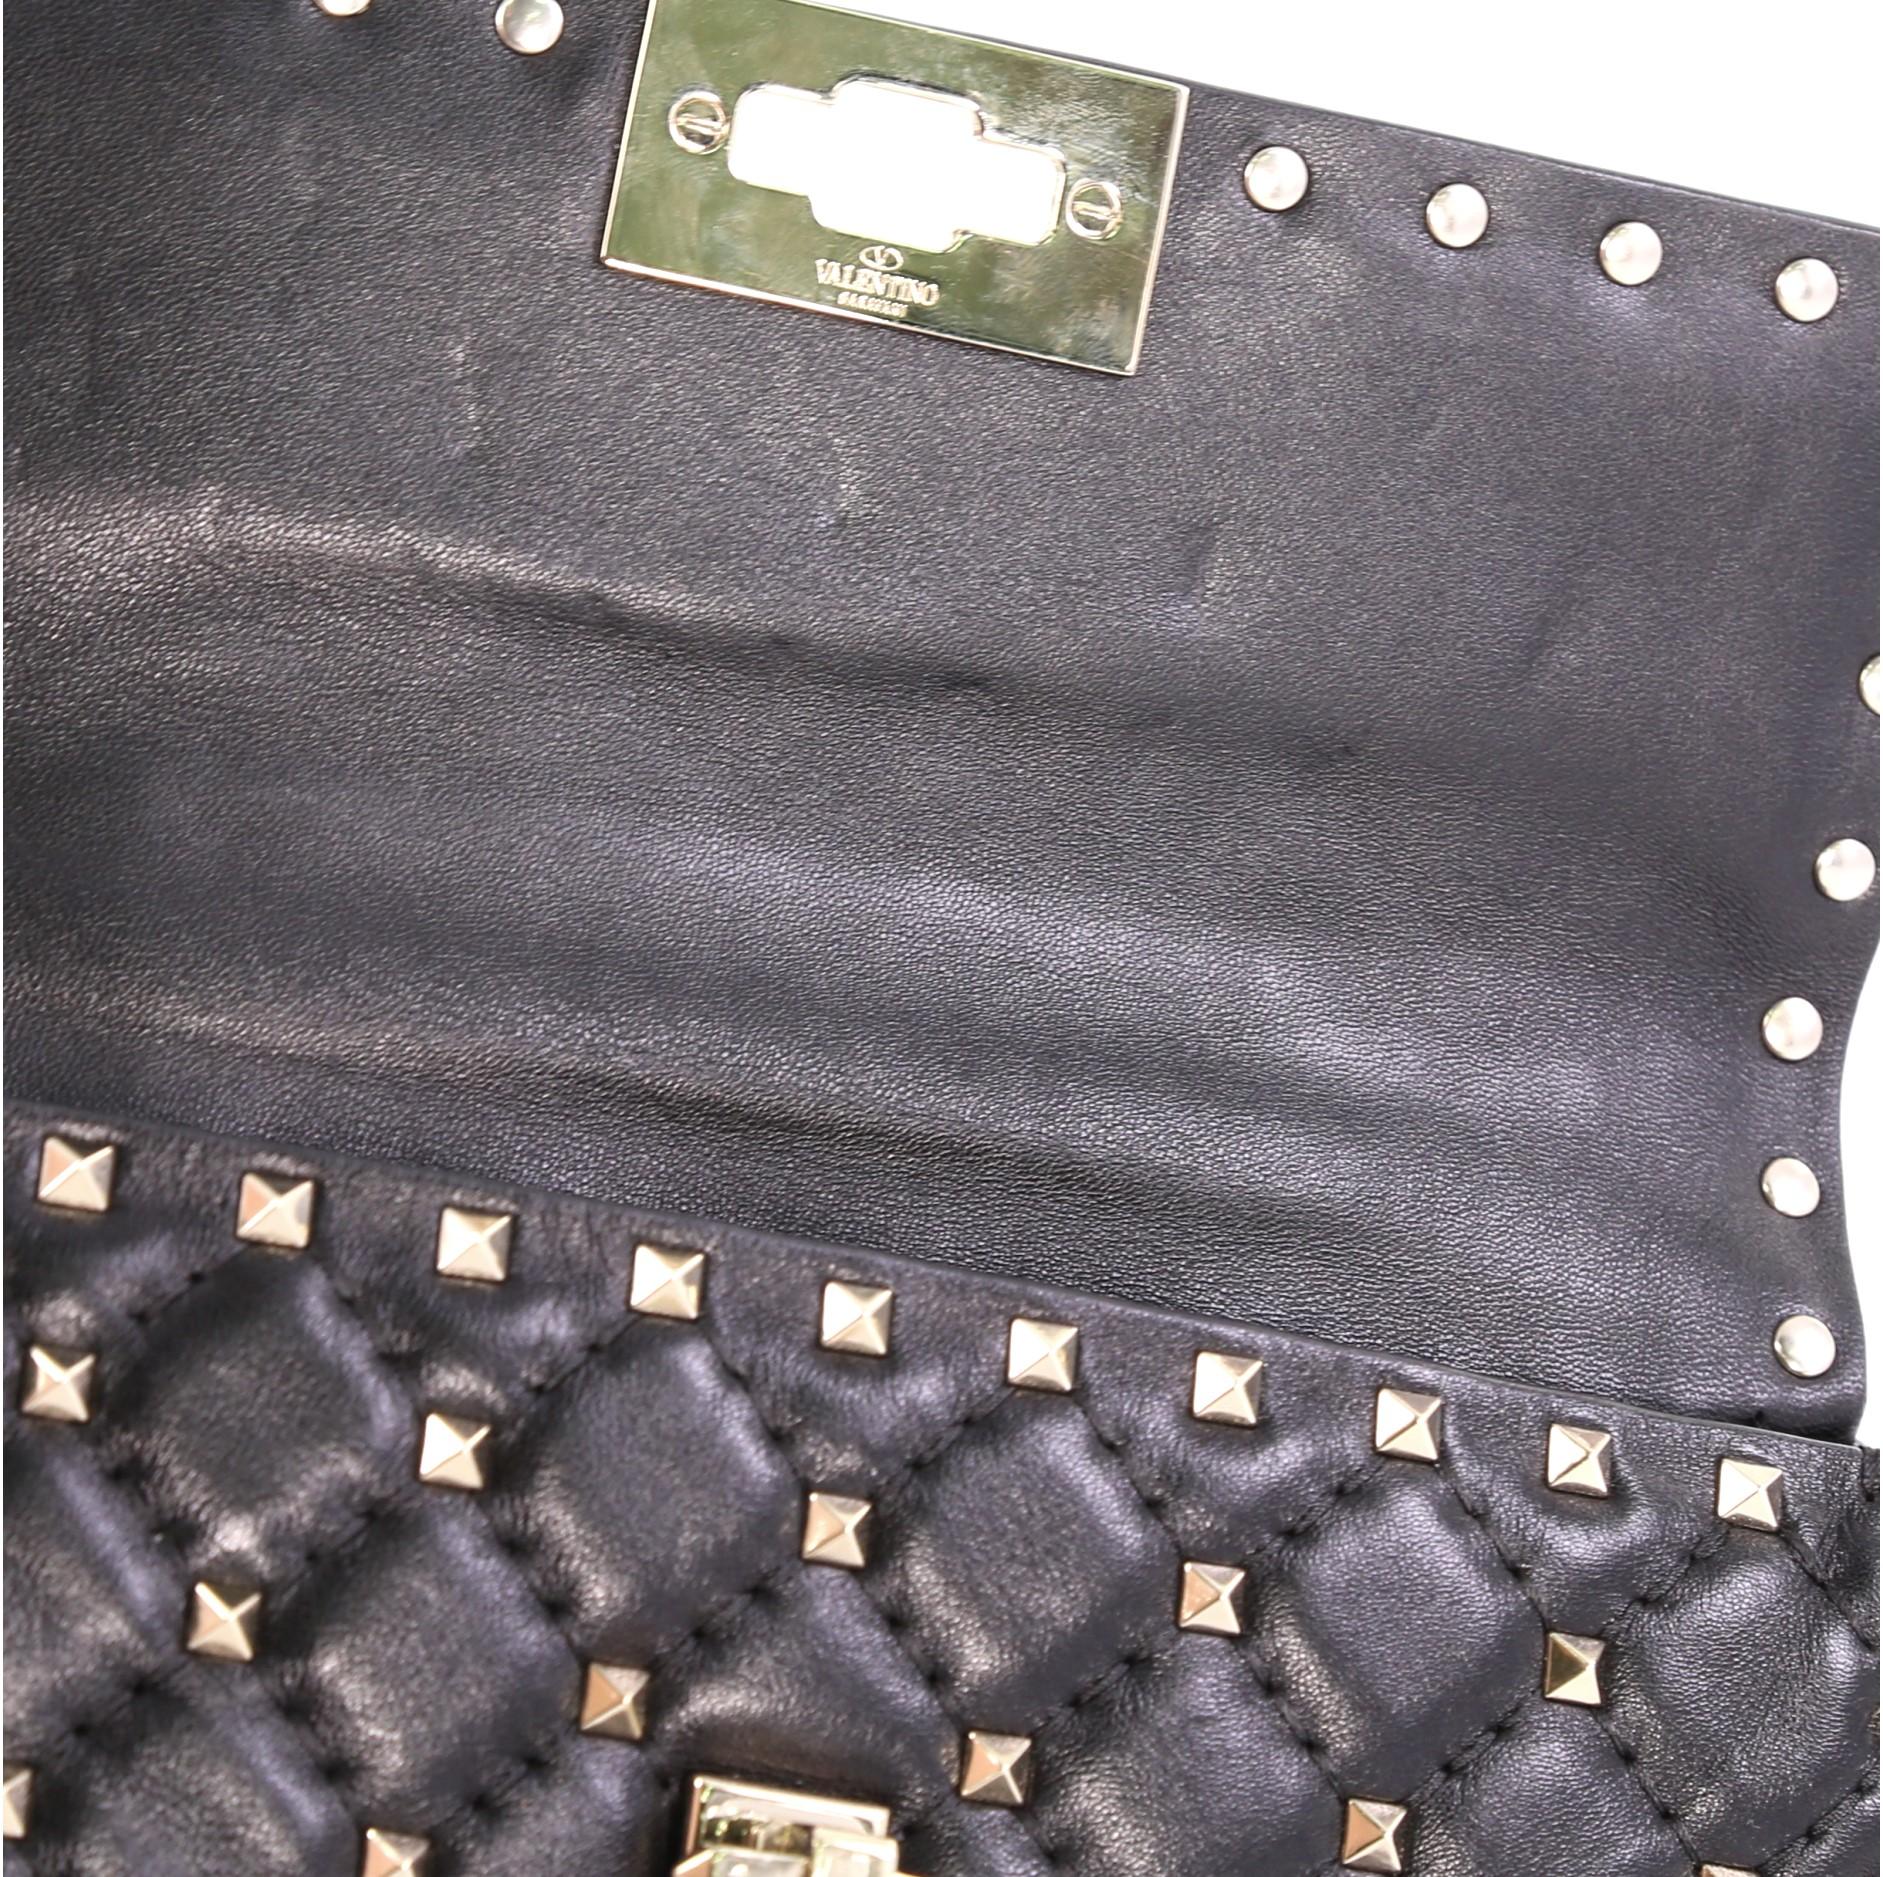 Women's Valentino Rockstud Spike Flap Bag Quilted Leather Small